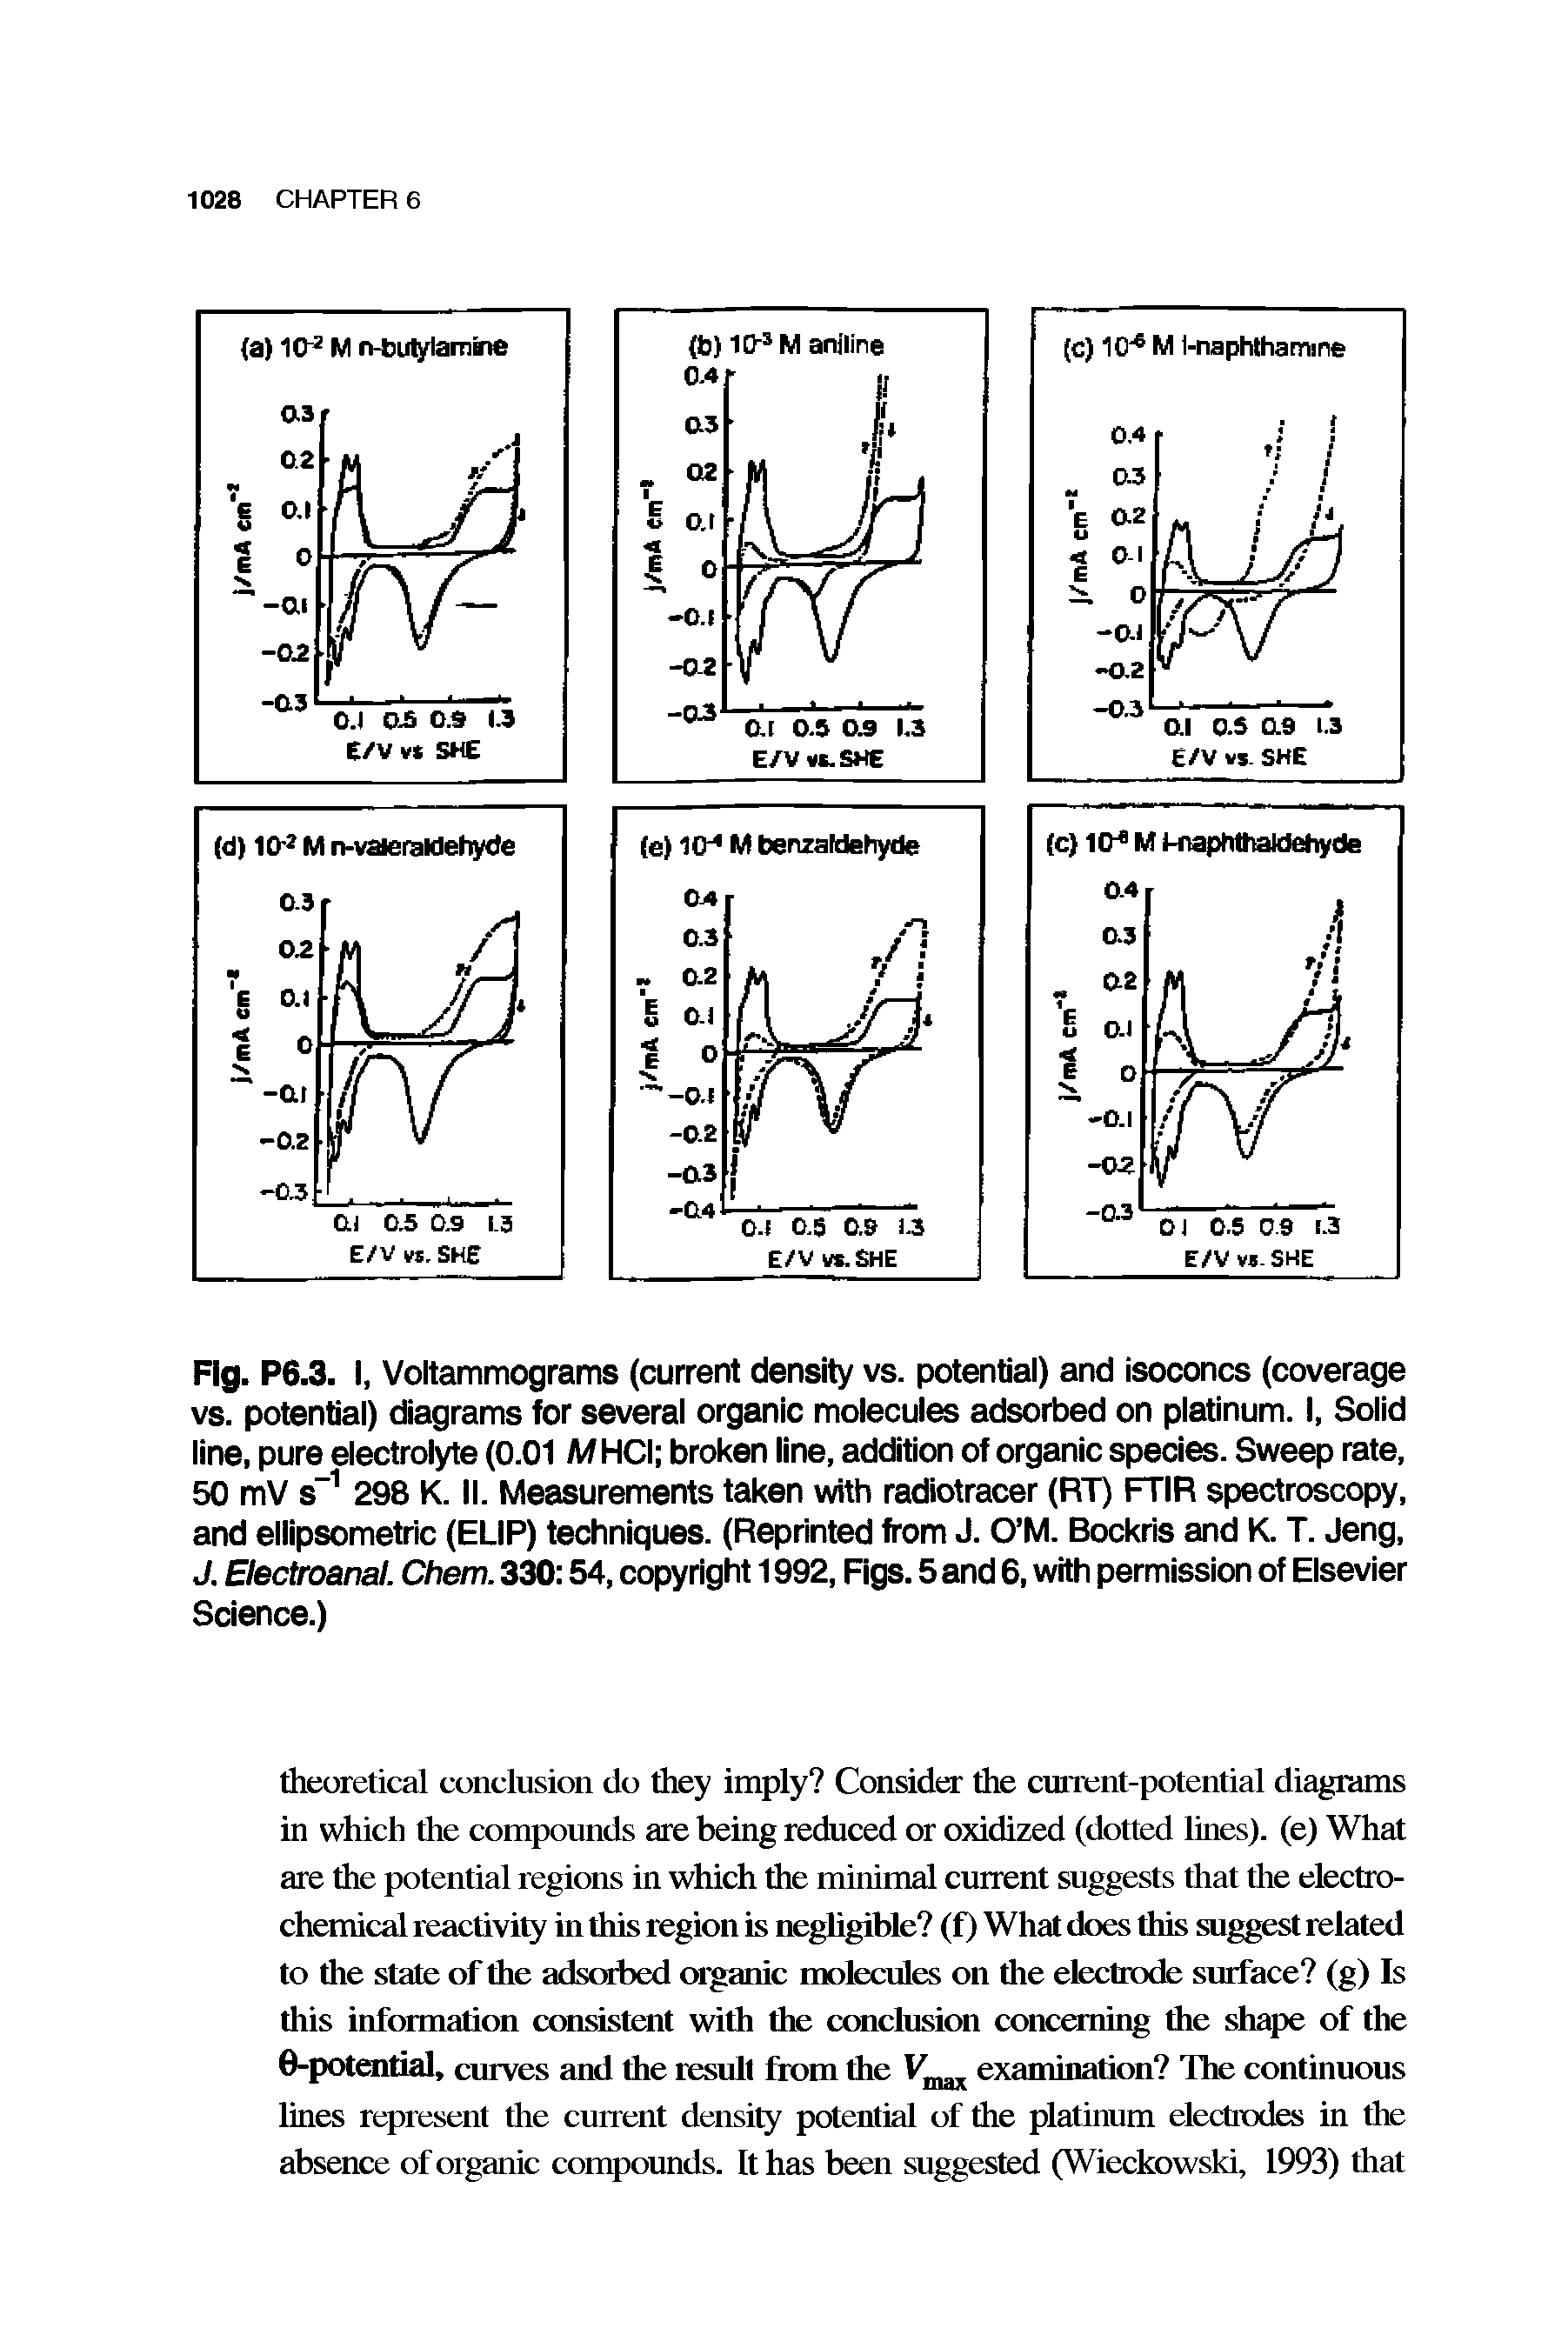 Fig. P6.3. I, Voltammograms (current density vs. potential) and isoconcs (coverage vs. potential) diagrams for several organic molecules adsorbed on platinum. I, Solid line, pure electrolyte (0.01 MHCI broken line, addition of organic species. Sweep rate, 50 mV s"1 298 K. II. Measurements taken with radiotracer (RT) FTIR spectroscopy, and ellipsometric (ELIP) techniques. (Reprinted from J. O M. Bockris and K. T. Jeng, J. Electroanal. Chem. 330 54, copyright 1992, Figs. 5 and 6, with permission of Elsevier Science.)...